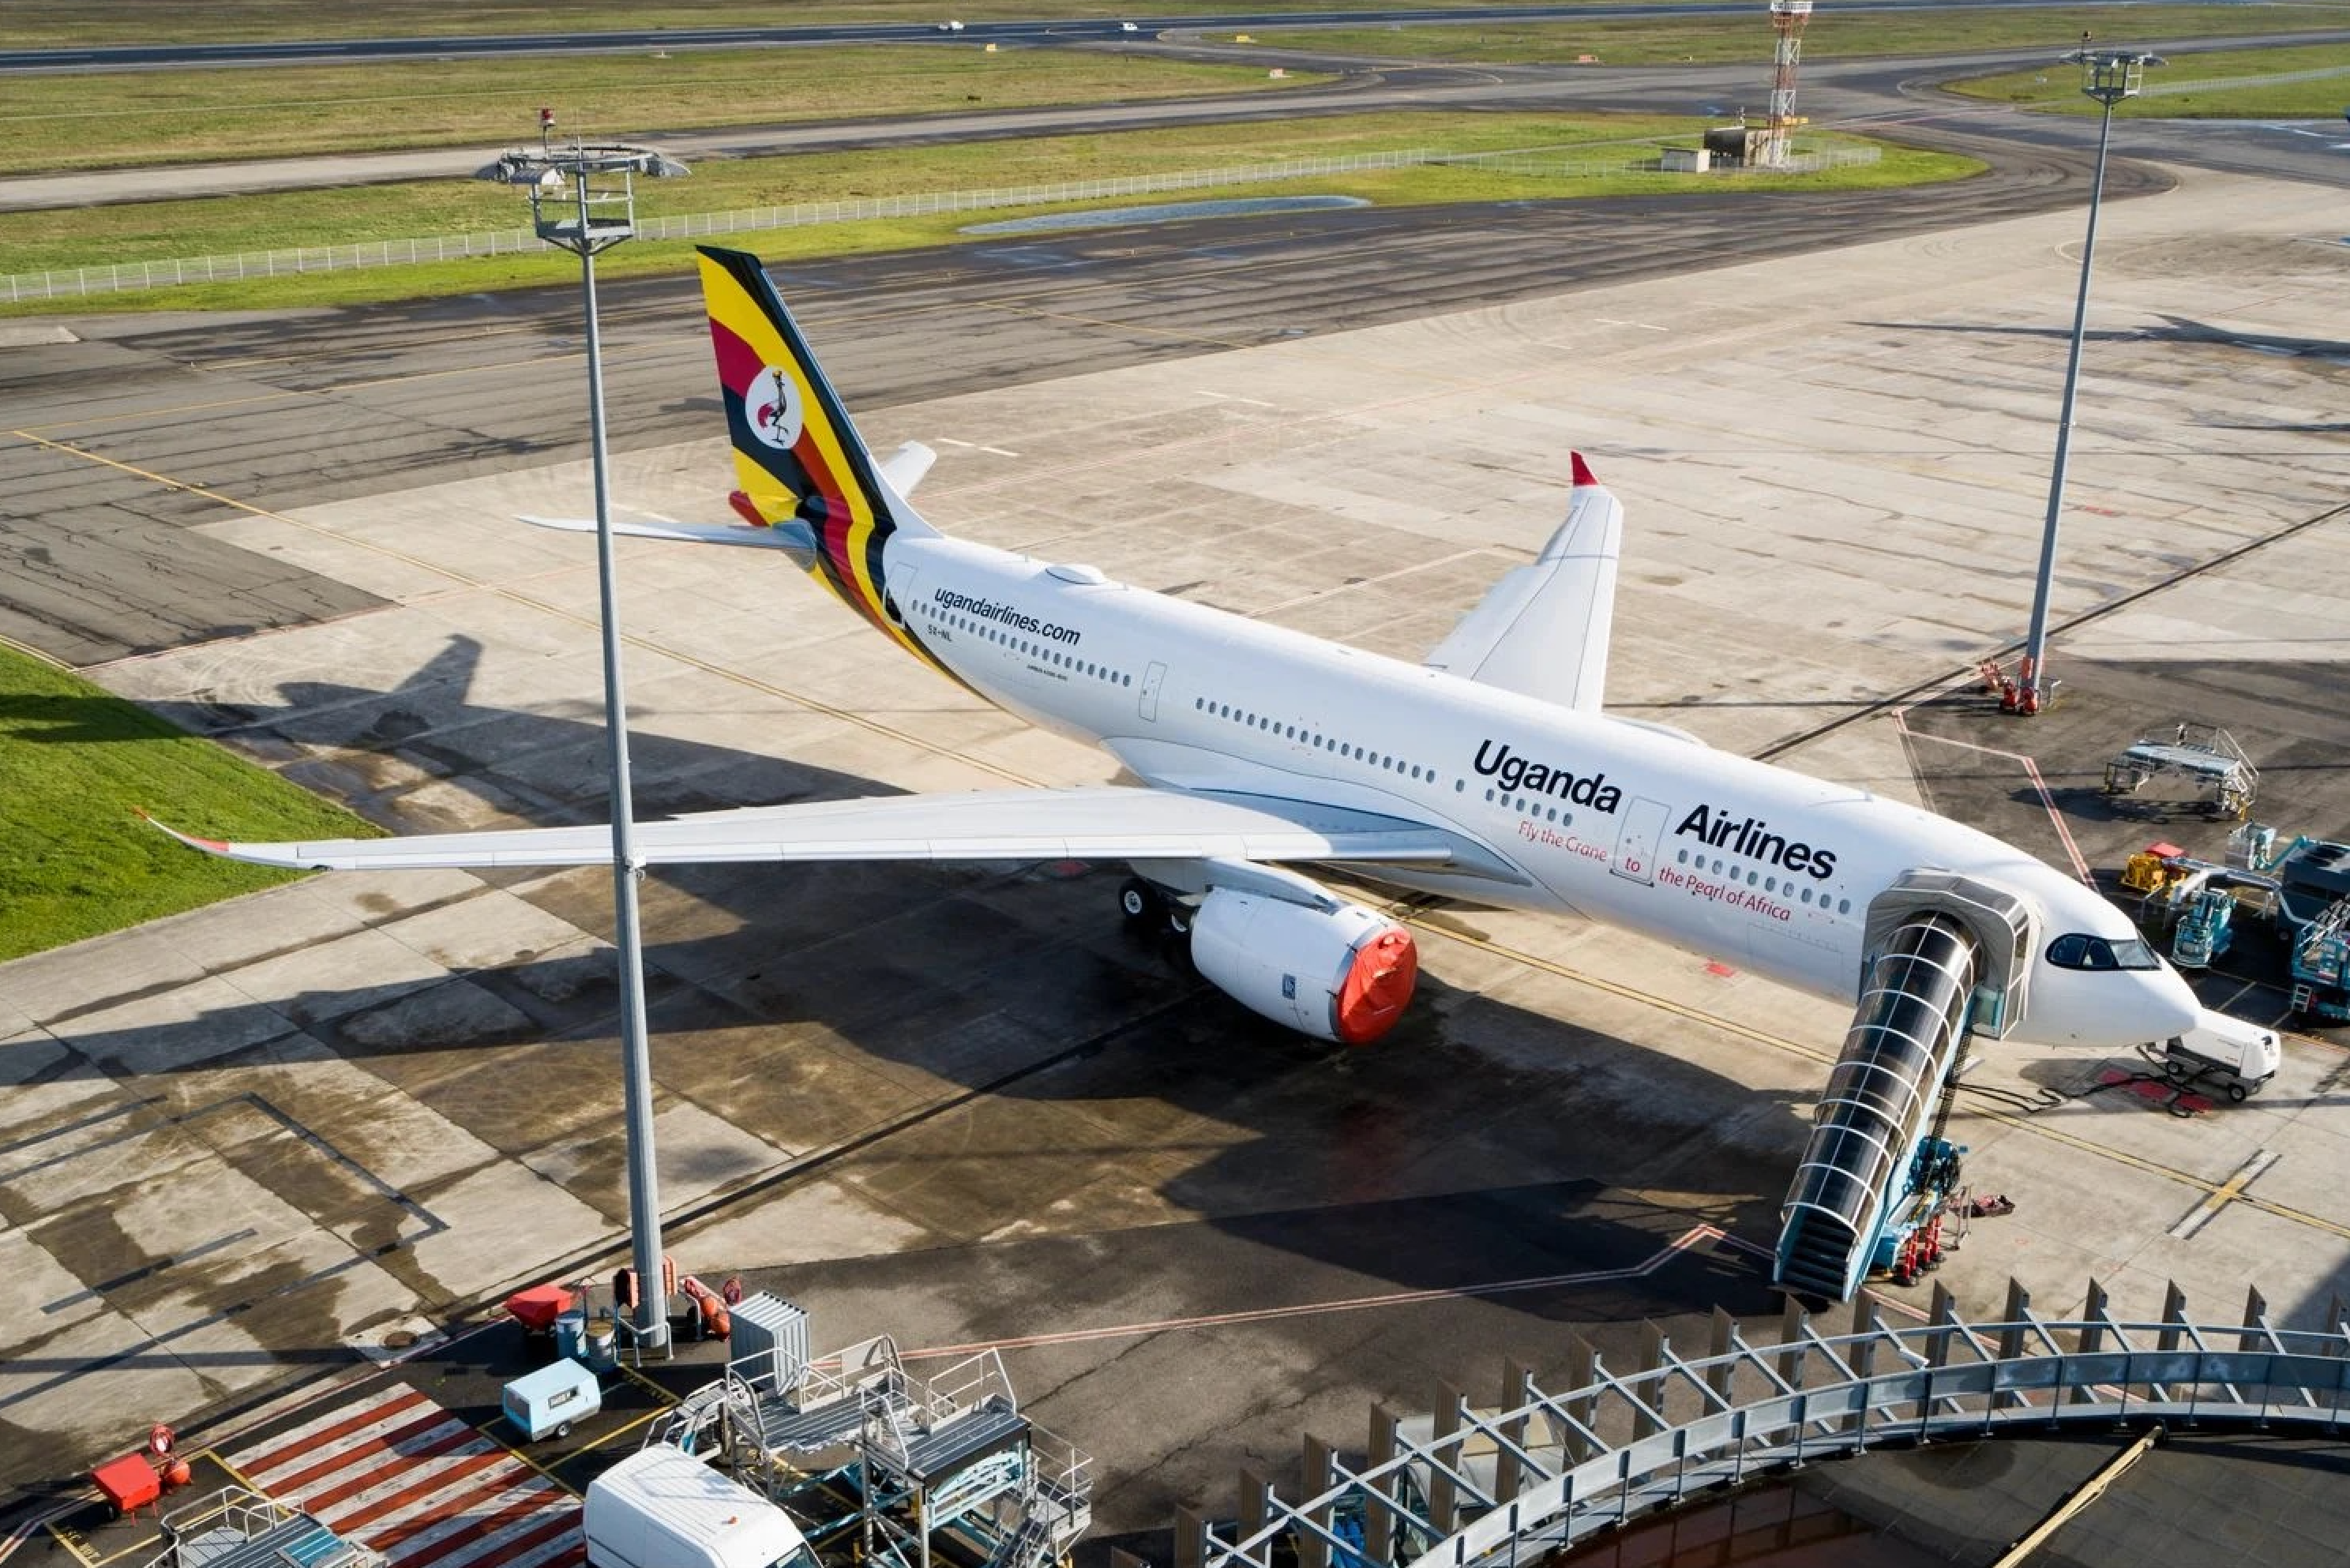 Uganda Airlines A330-800neo